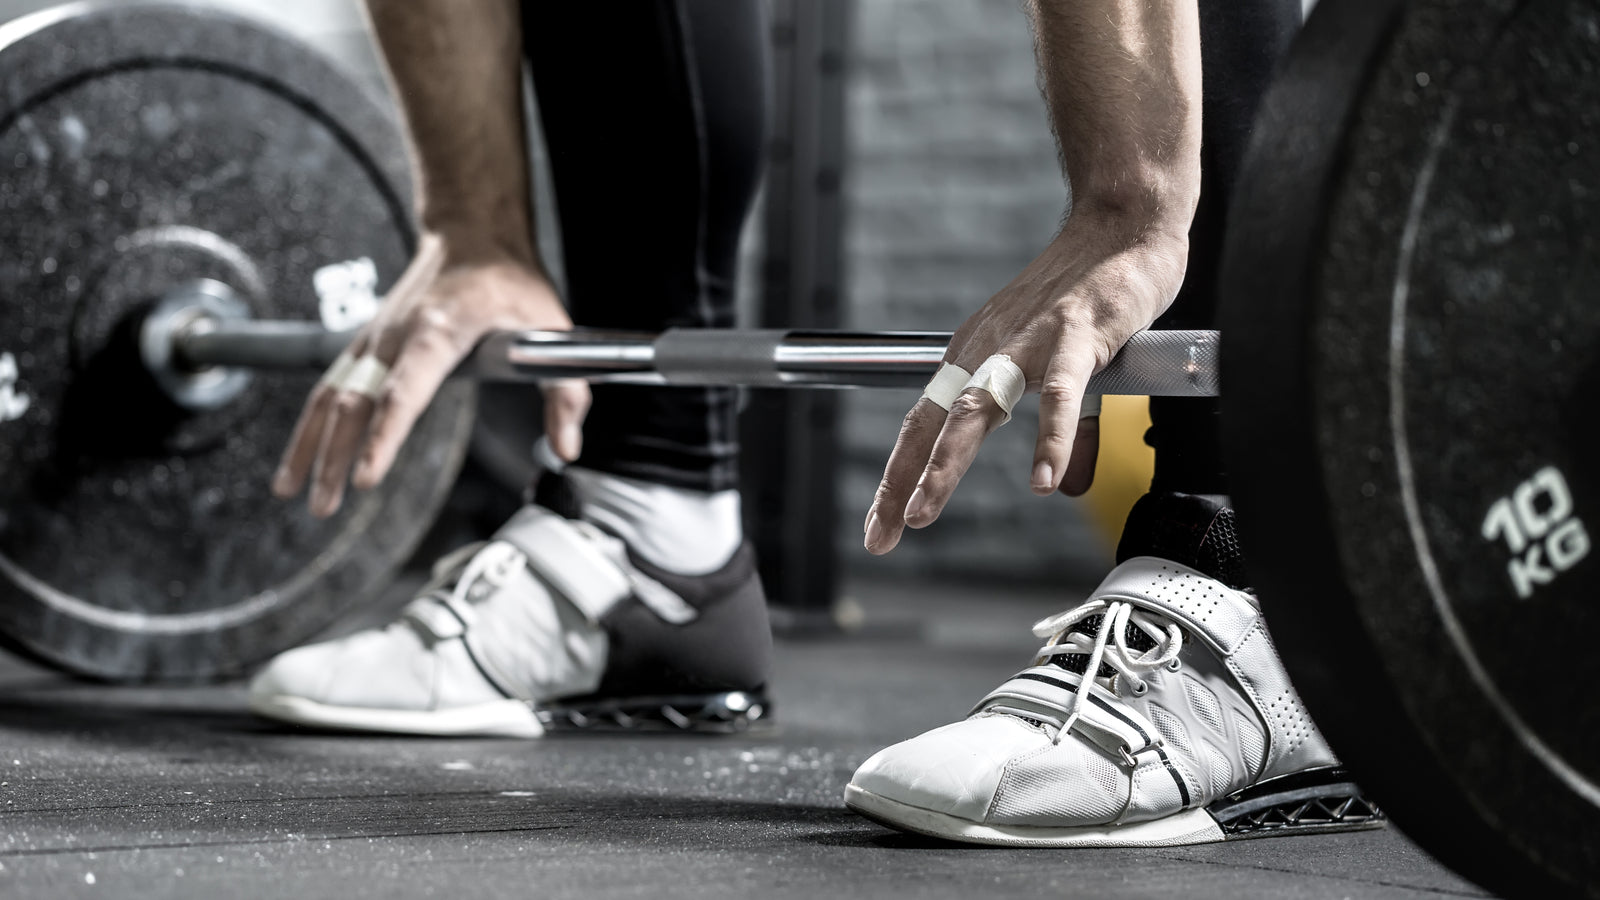 3 Strength Training Tips To Improve Your Form